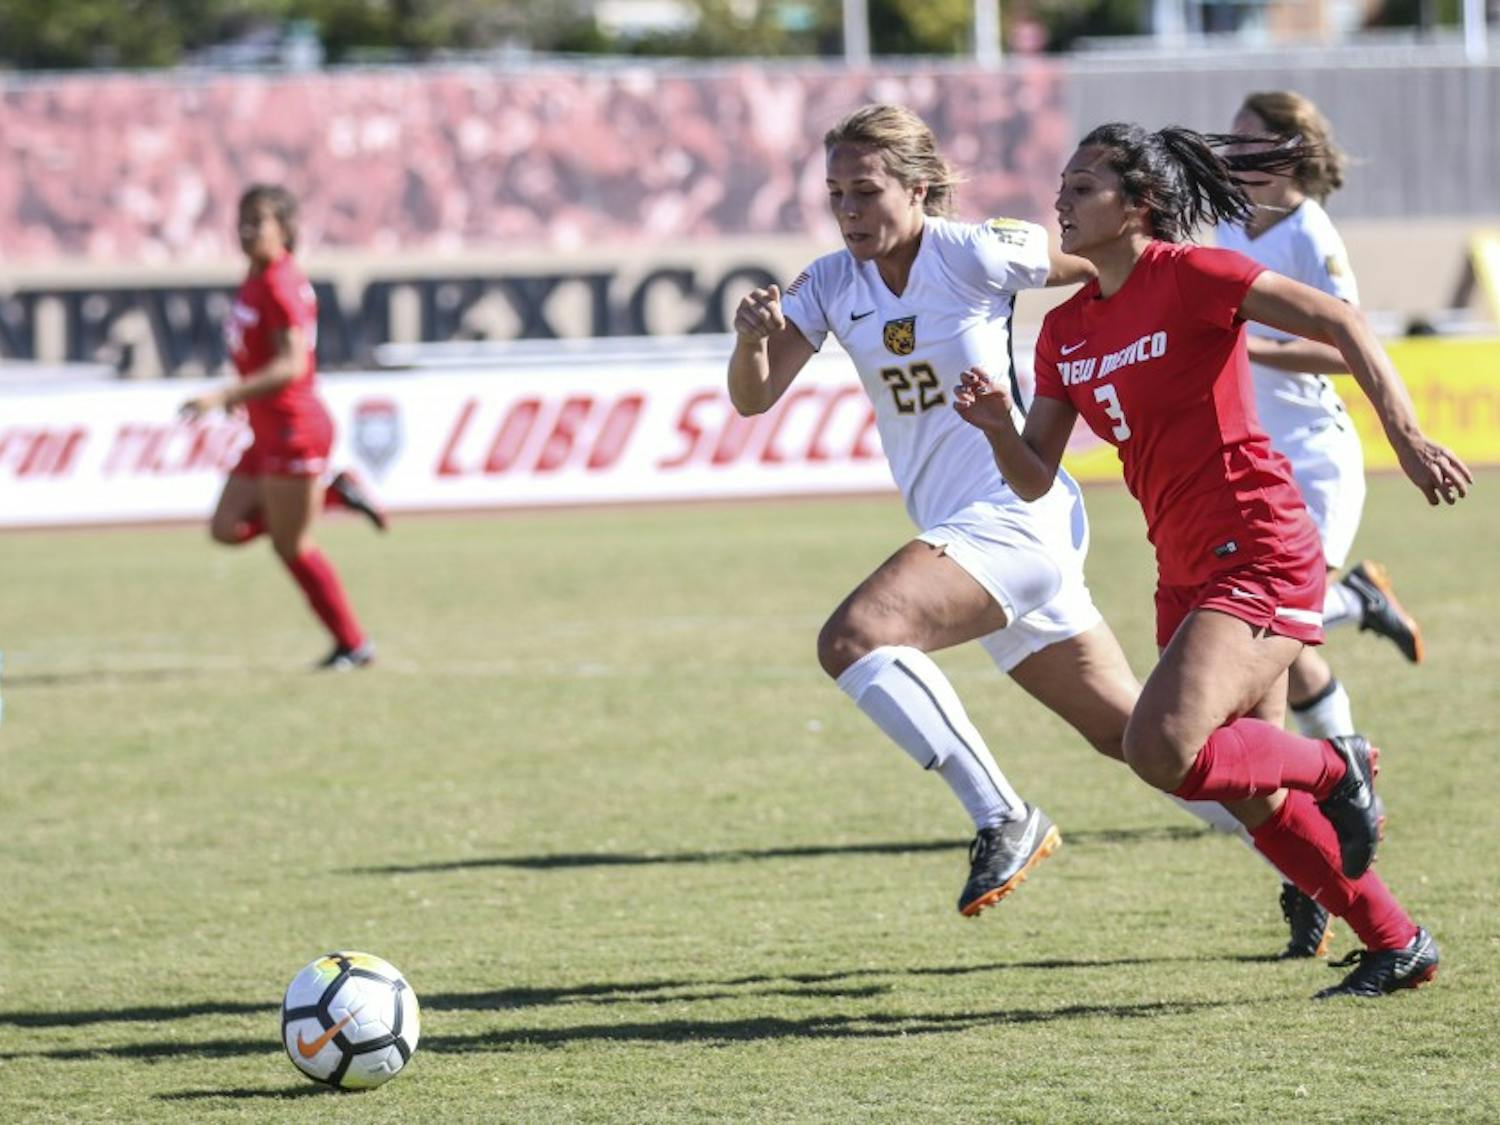 Leilani Baker races to the ball against Colorado College player, UNM won 2-1